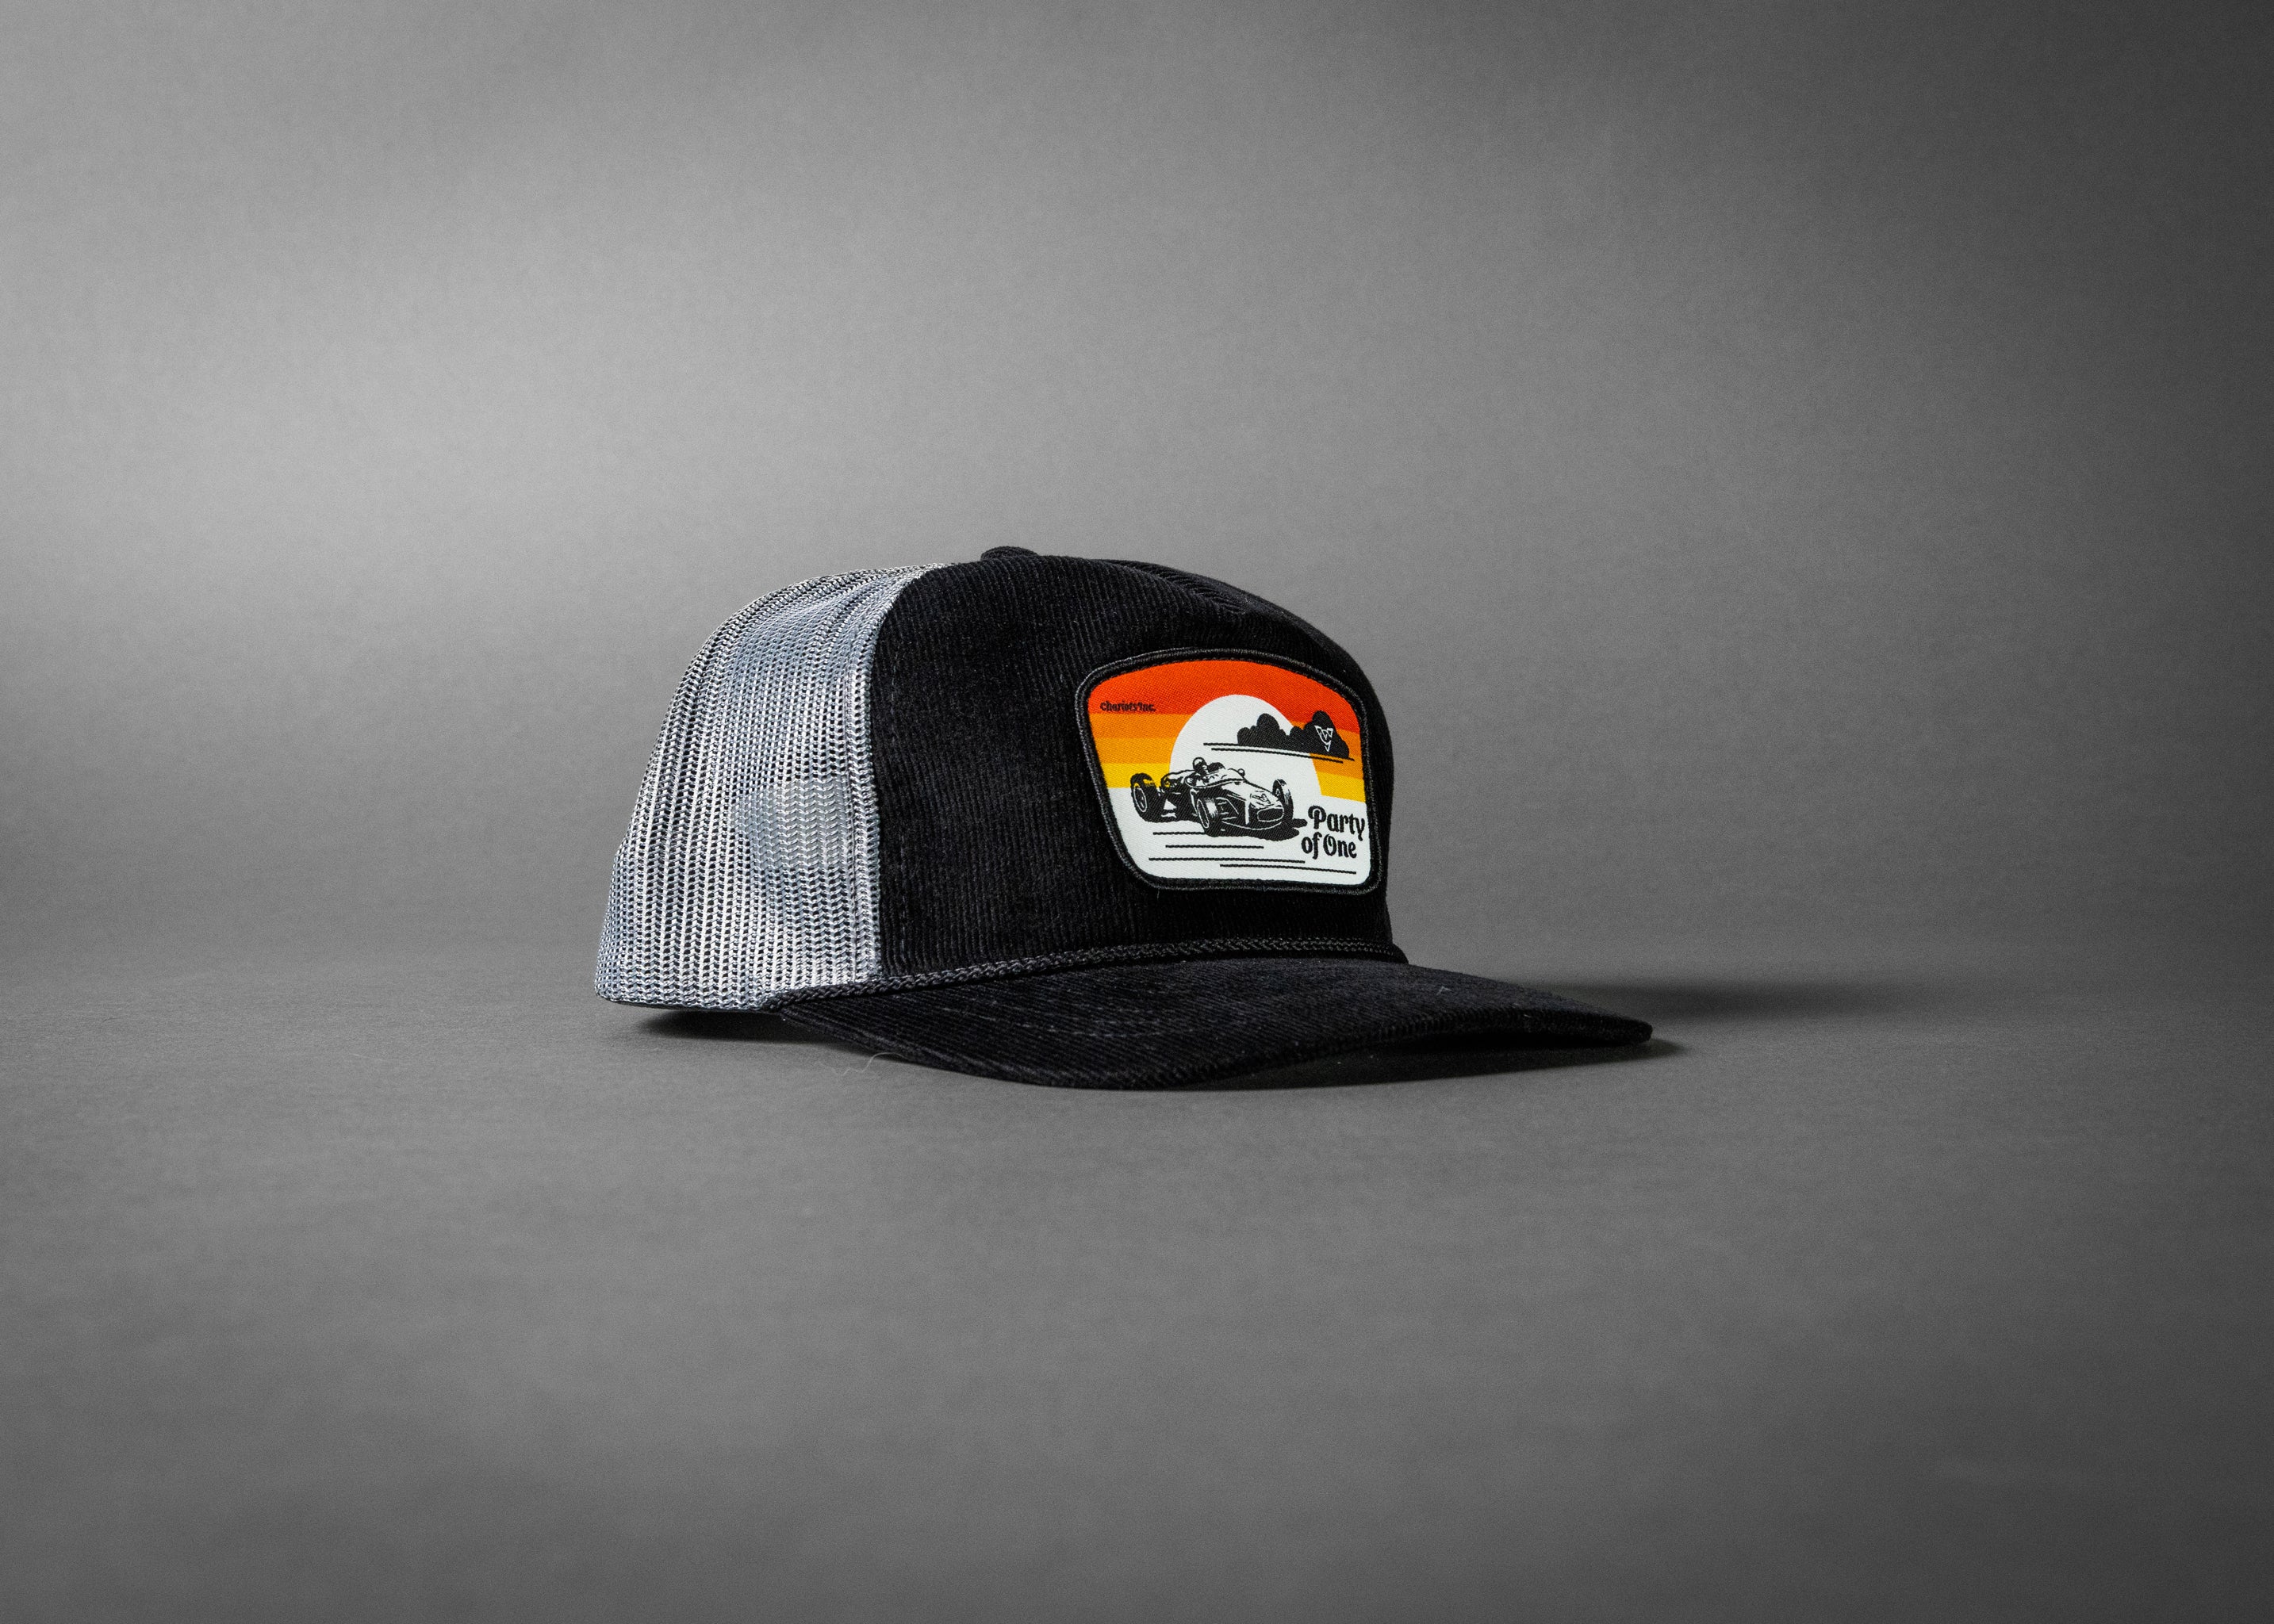 PARTY OF ONE (Black/Charcoal Corduroy Trucker Hat)